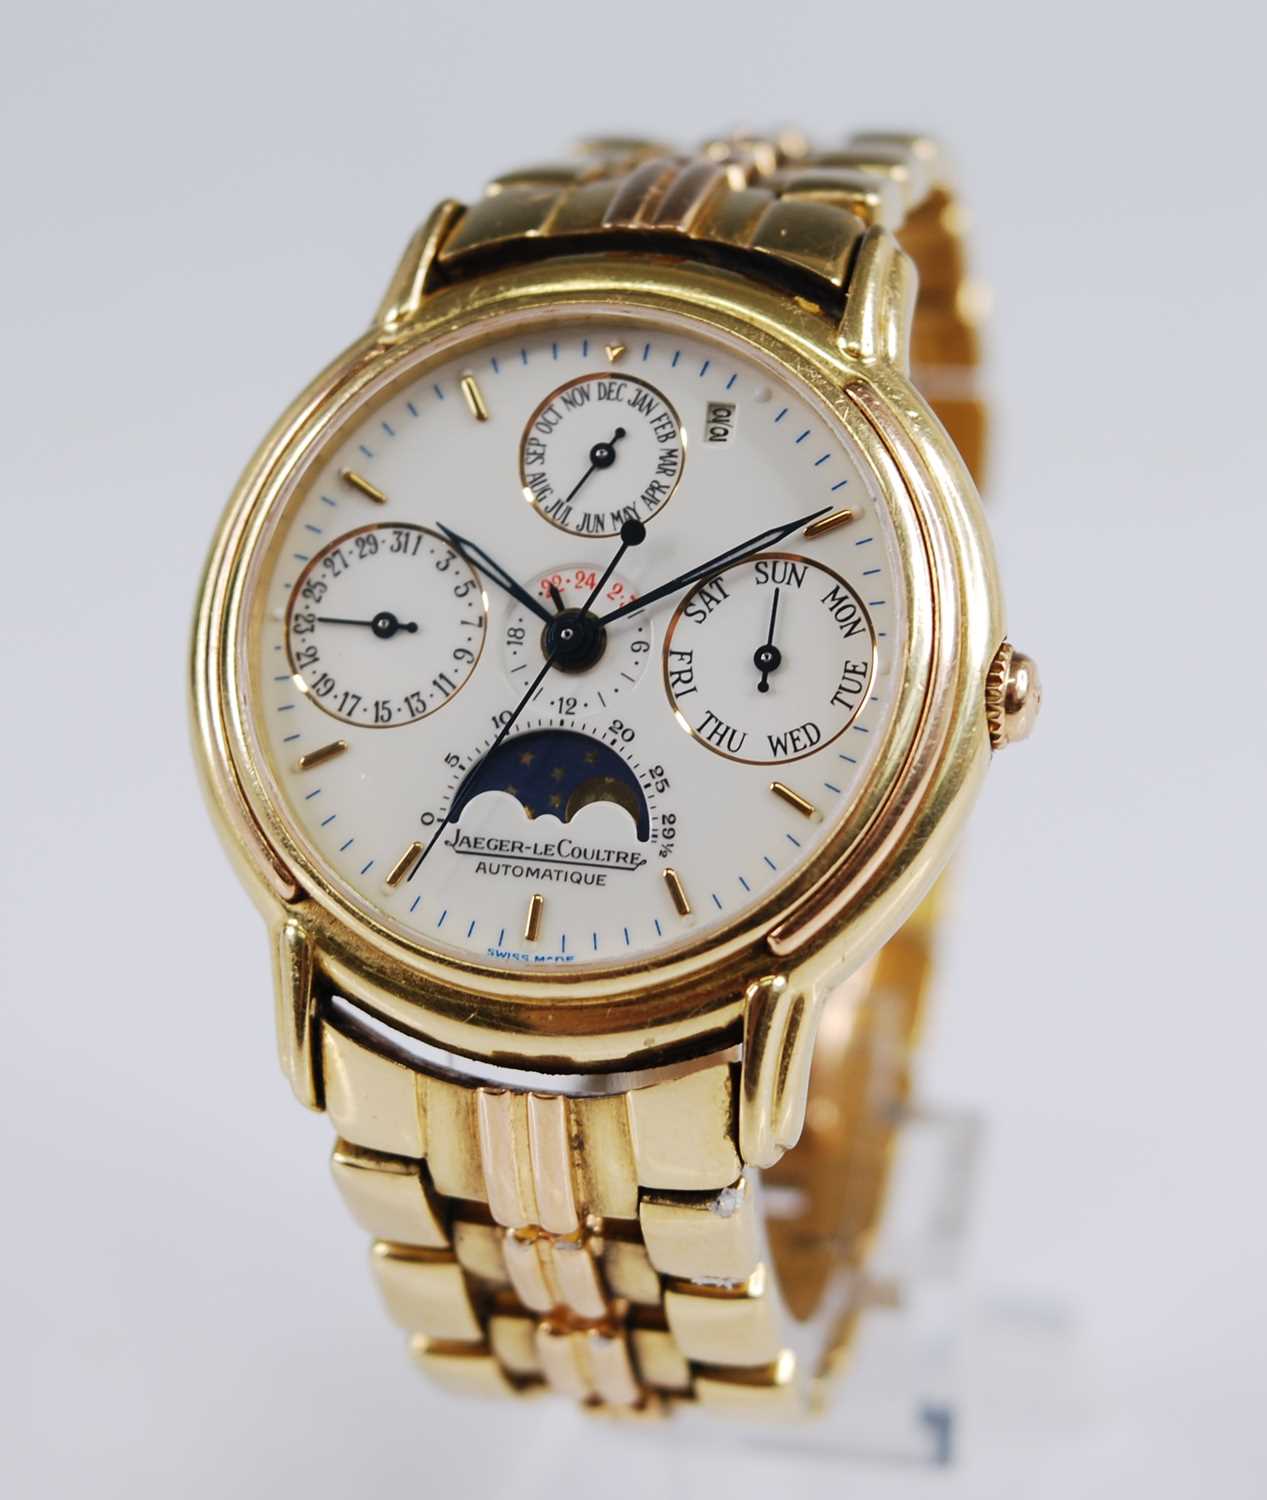 A gent's Jaeger LeCoultre 18ct gold cased Odysseus perpetual calendar watch, ref: 166.7.80, No.